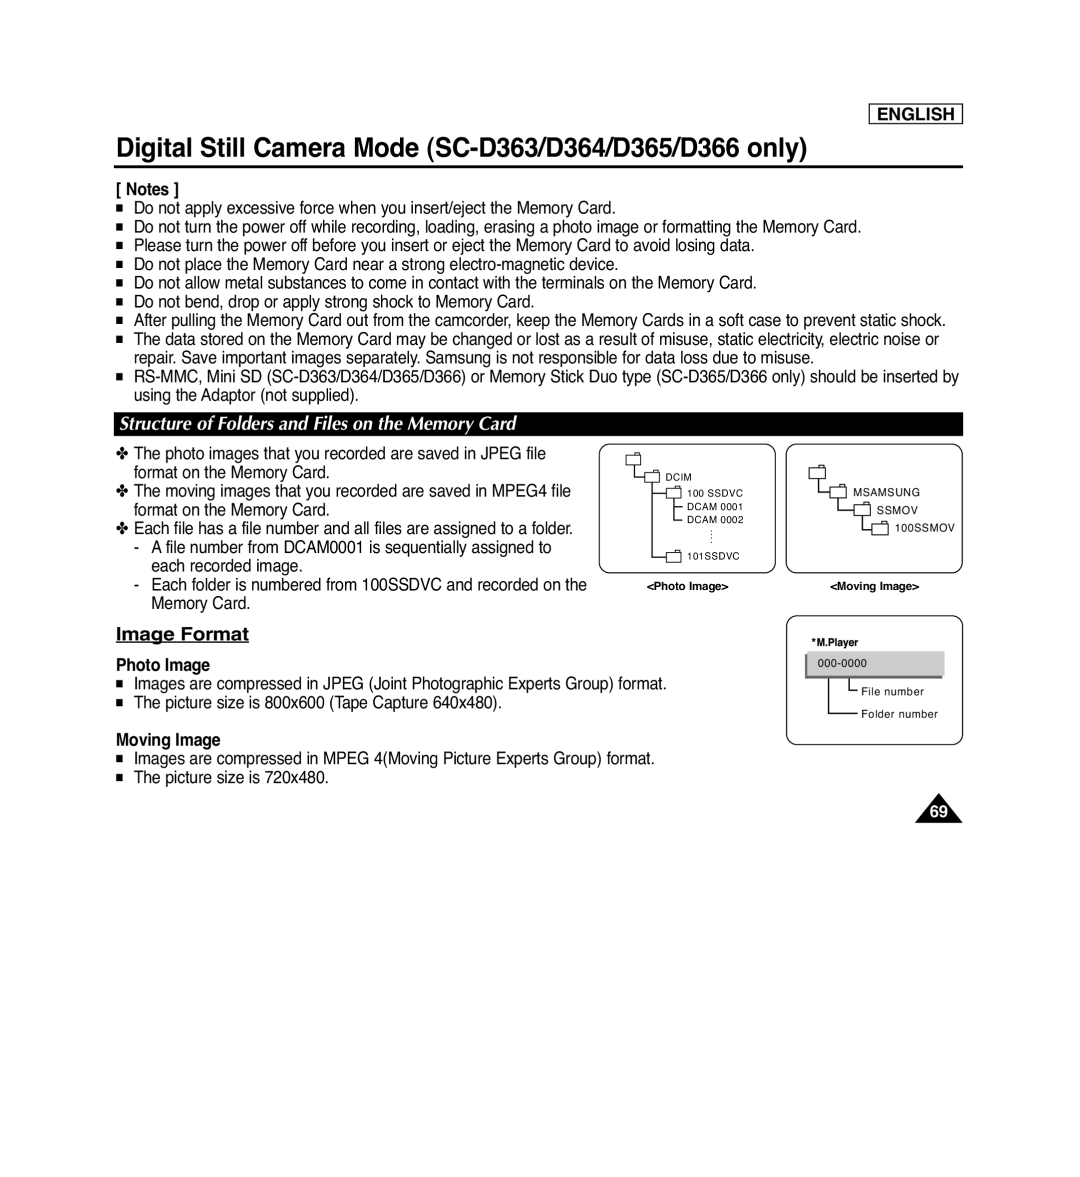 Samsung SC-D366 manual Image Format, Structure of Folders and Files on the Memory Card, Photo Image, Moving Image, English 